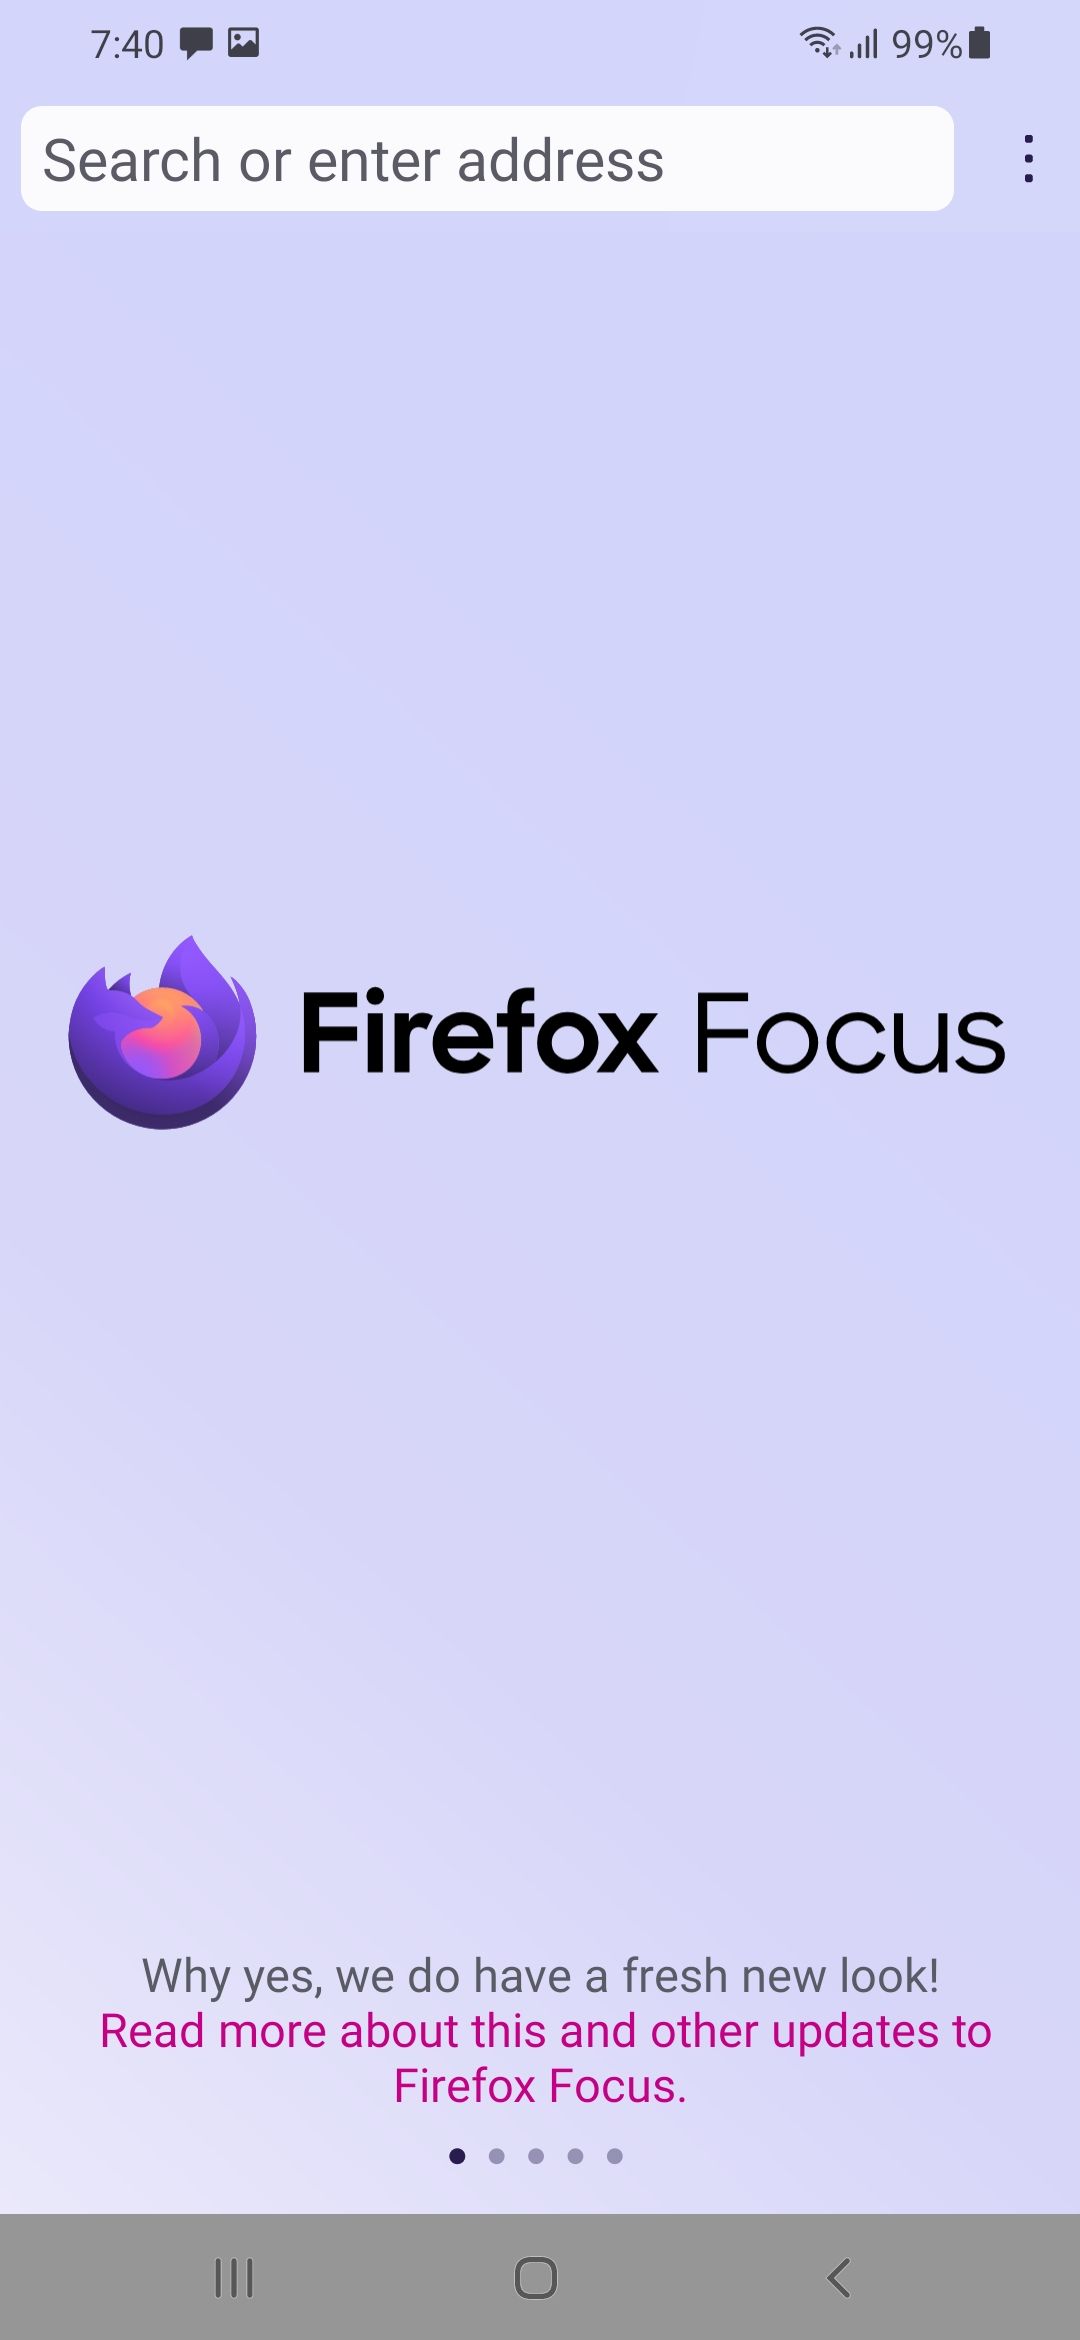 Firefox Focus Home Screen on Android